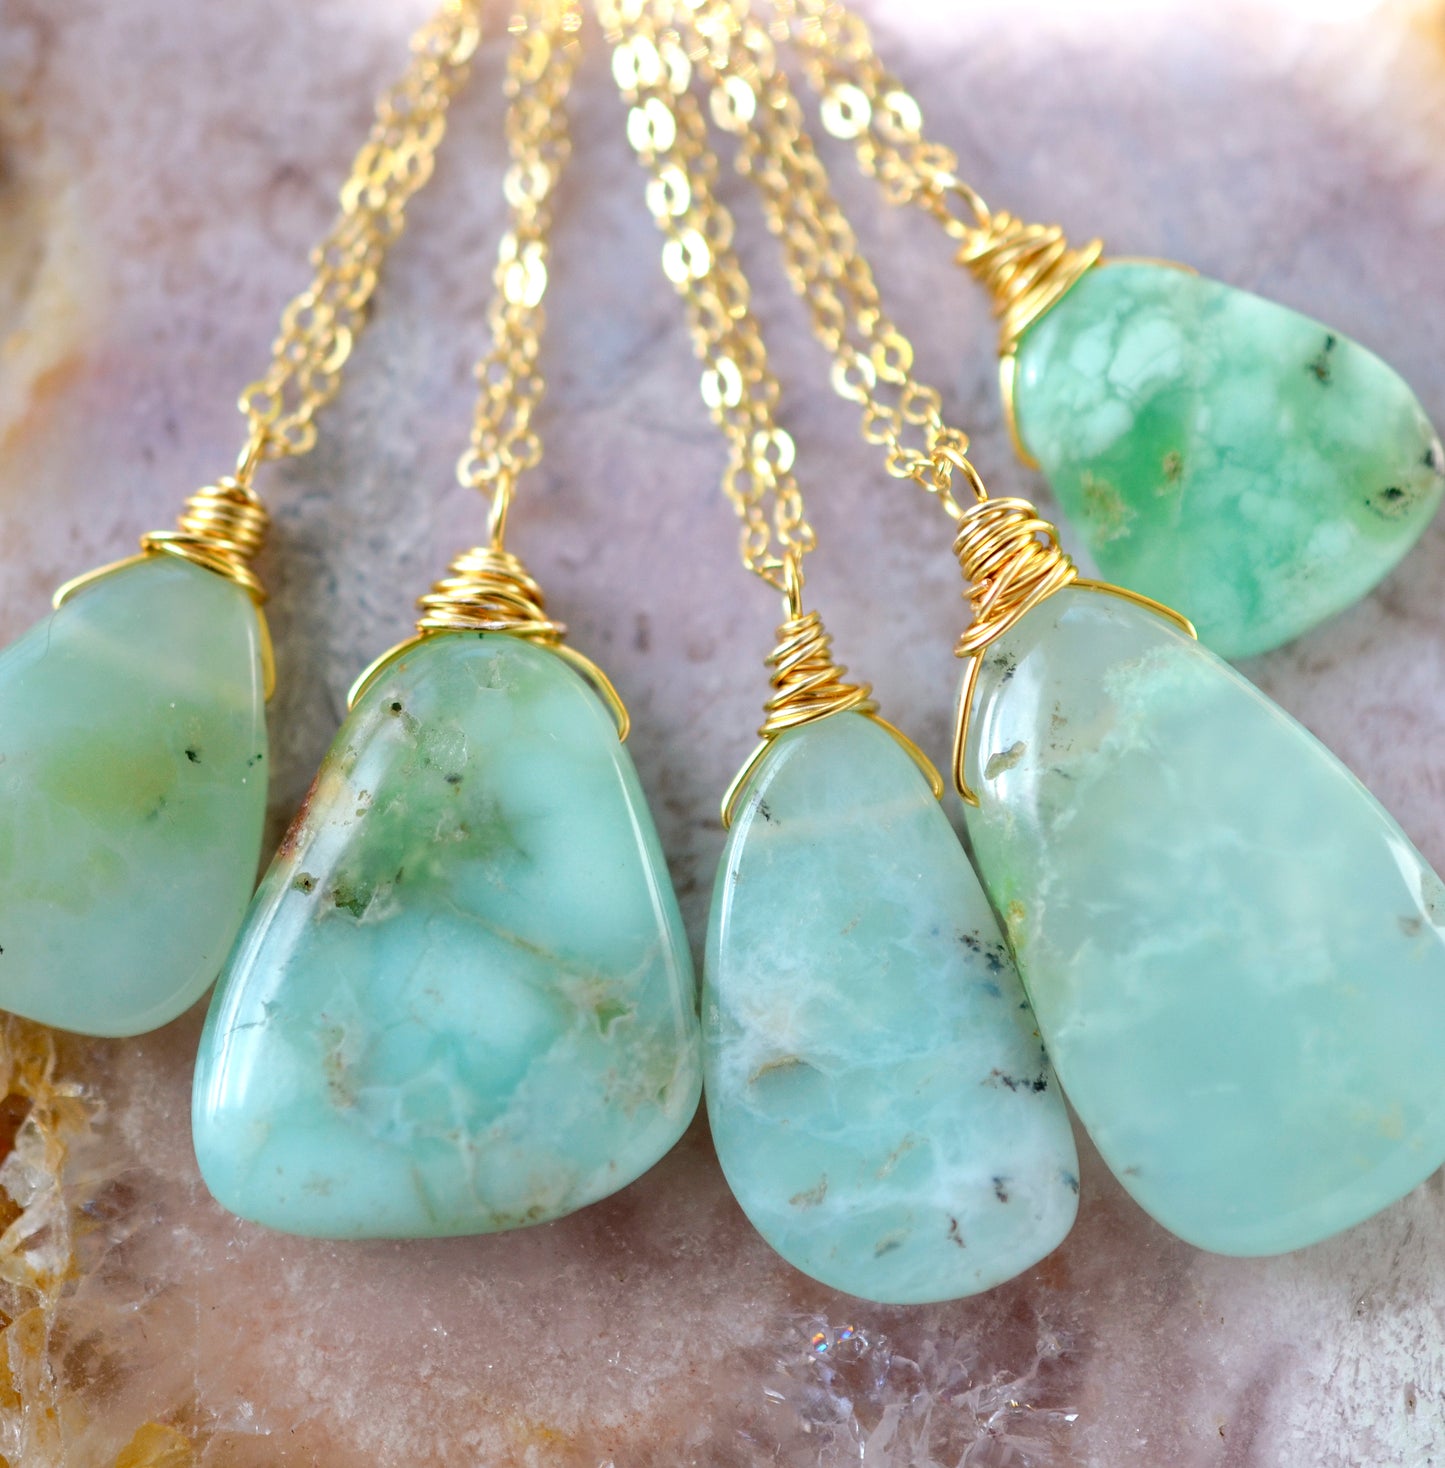 Green Chrysoprase Organic Pendant Necklace in Sterling Silver or 14k Gold Filled